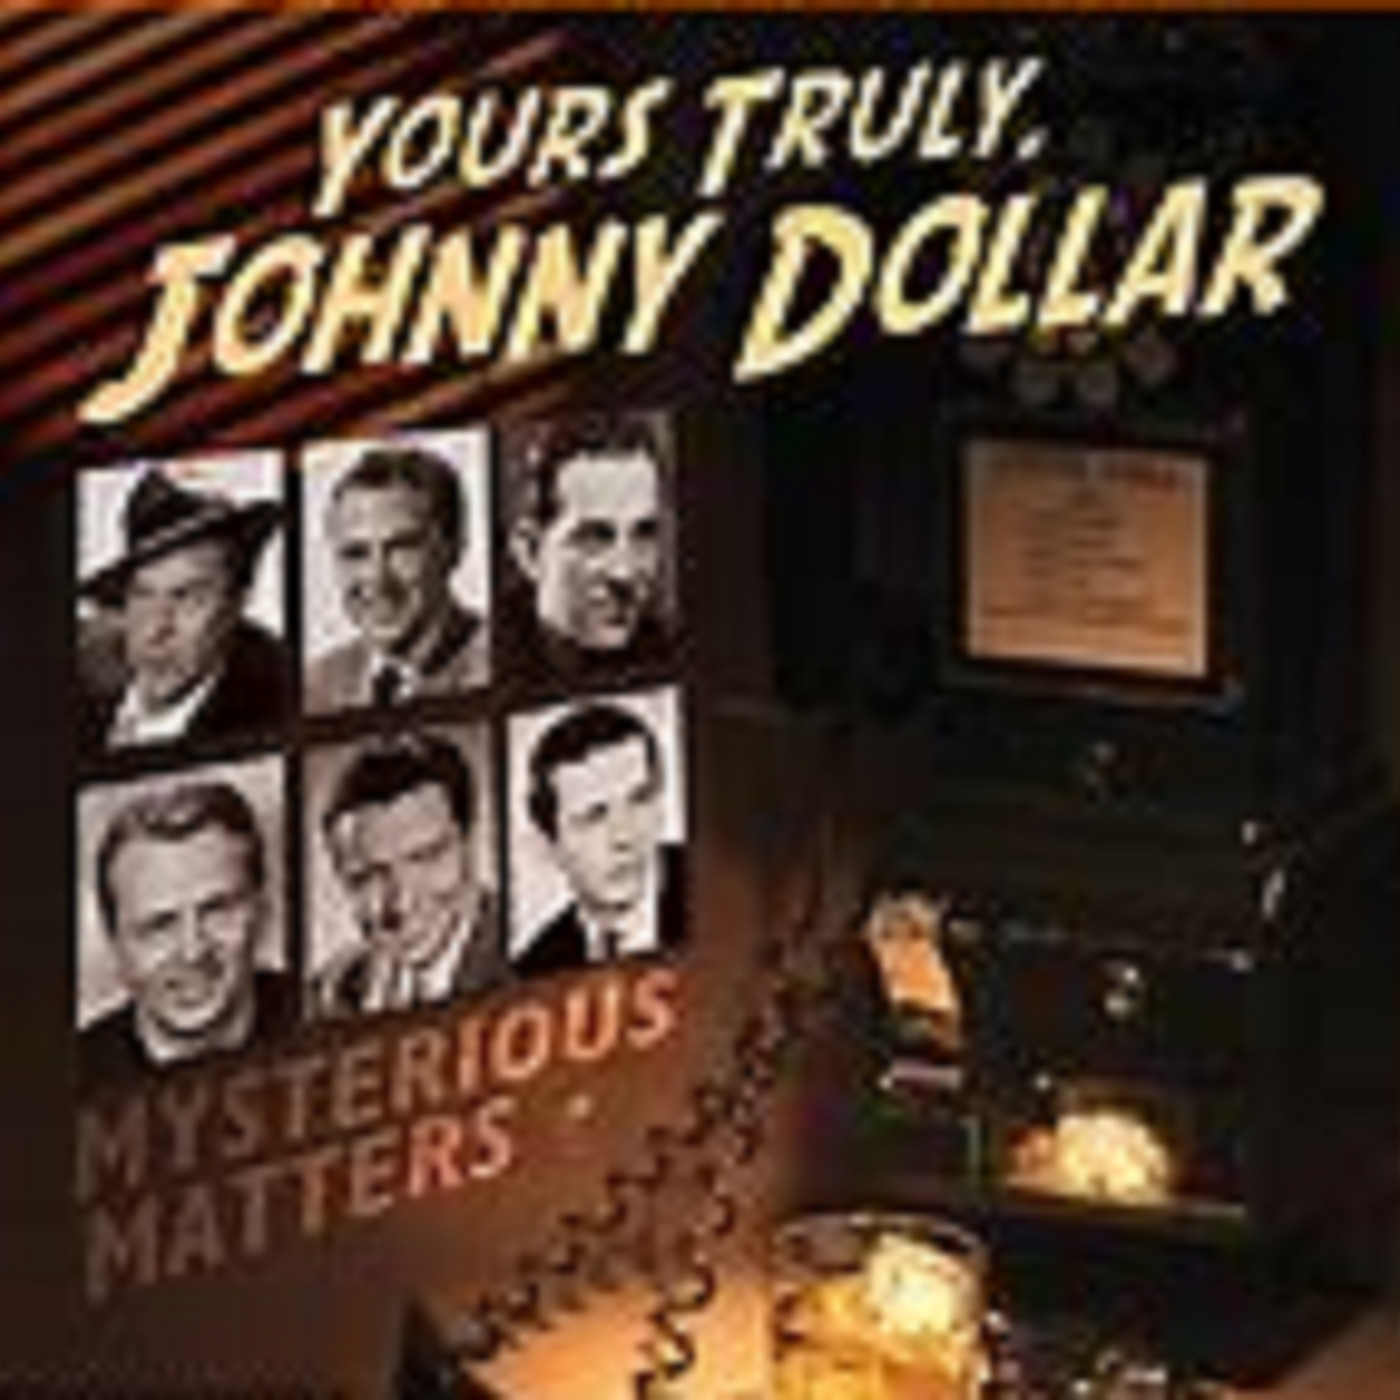 Yours Truly, Johnny Dollar - 021862, episode 779 - The It Takes a Crook Matter